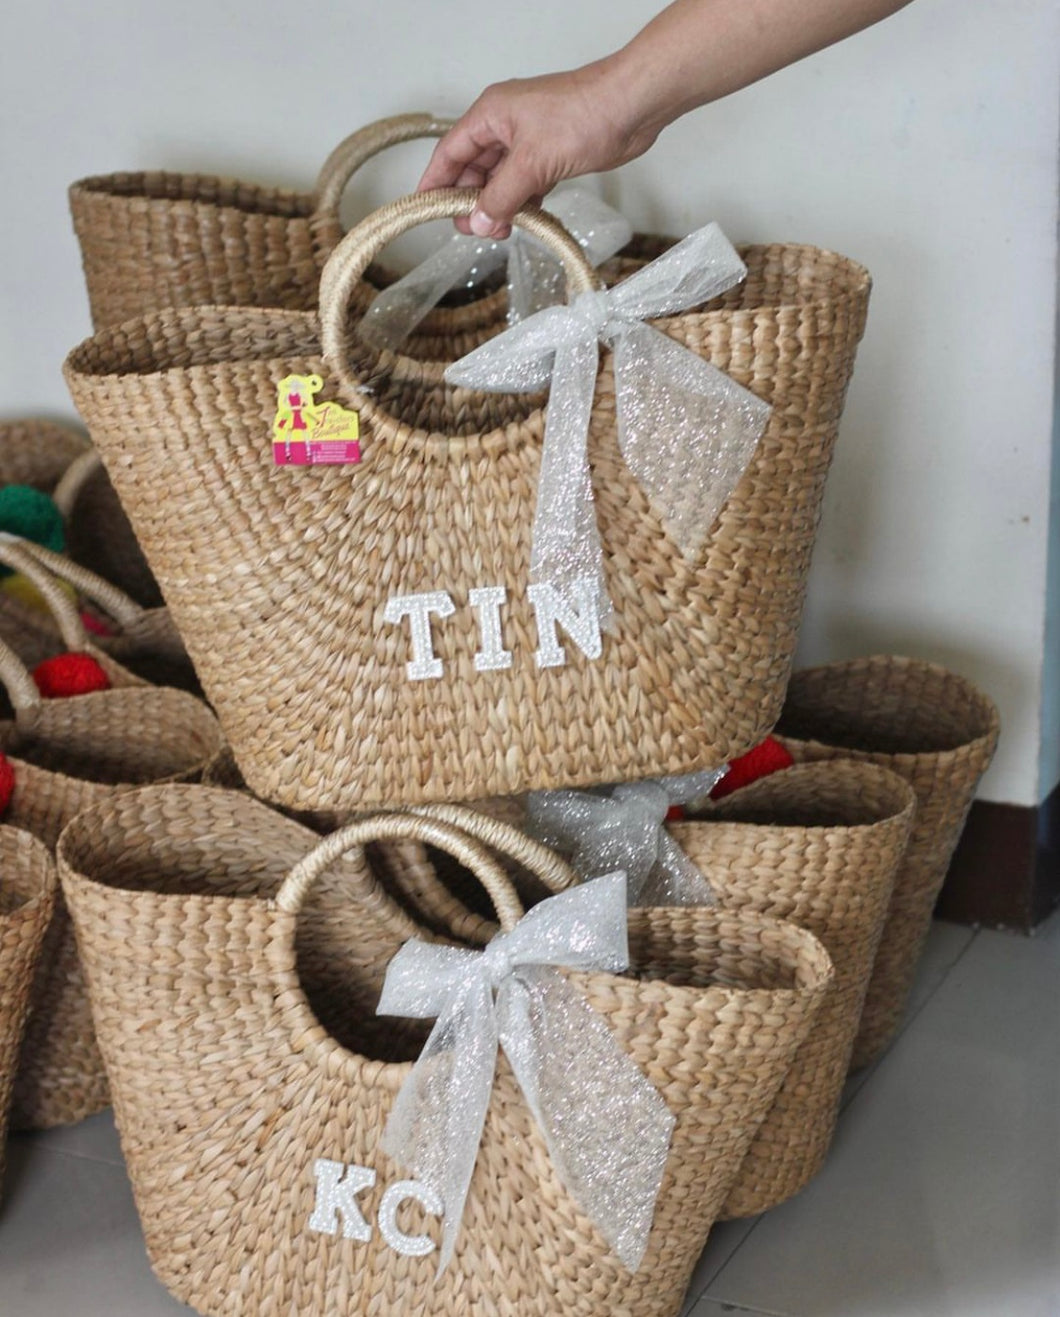 Personalized Woven Basket